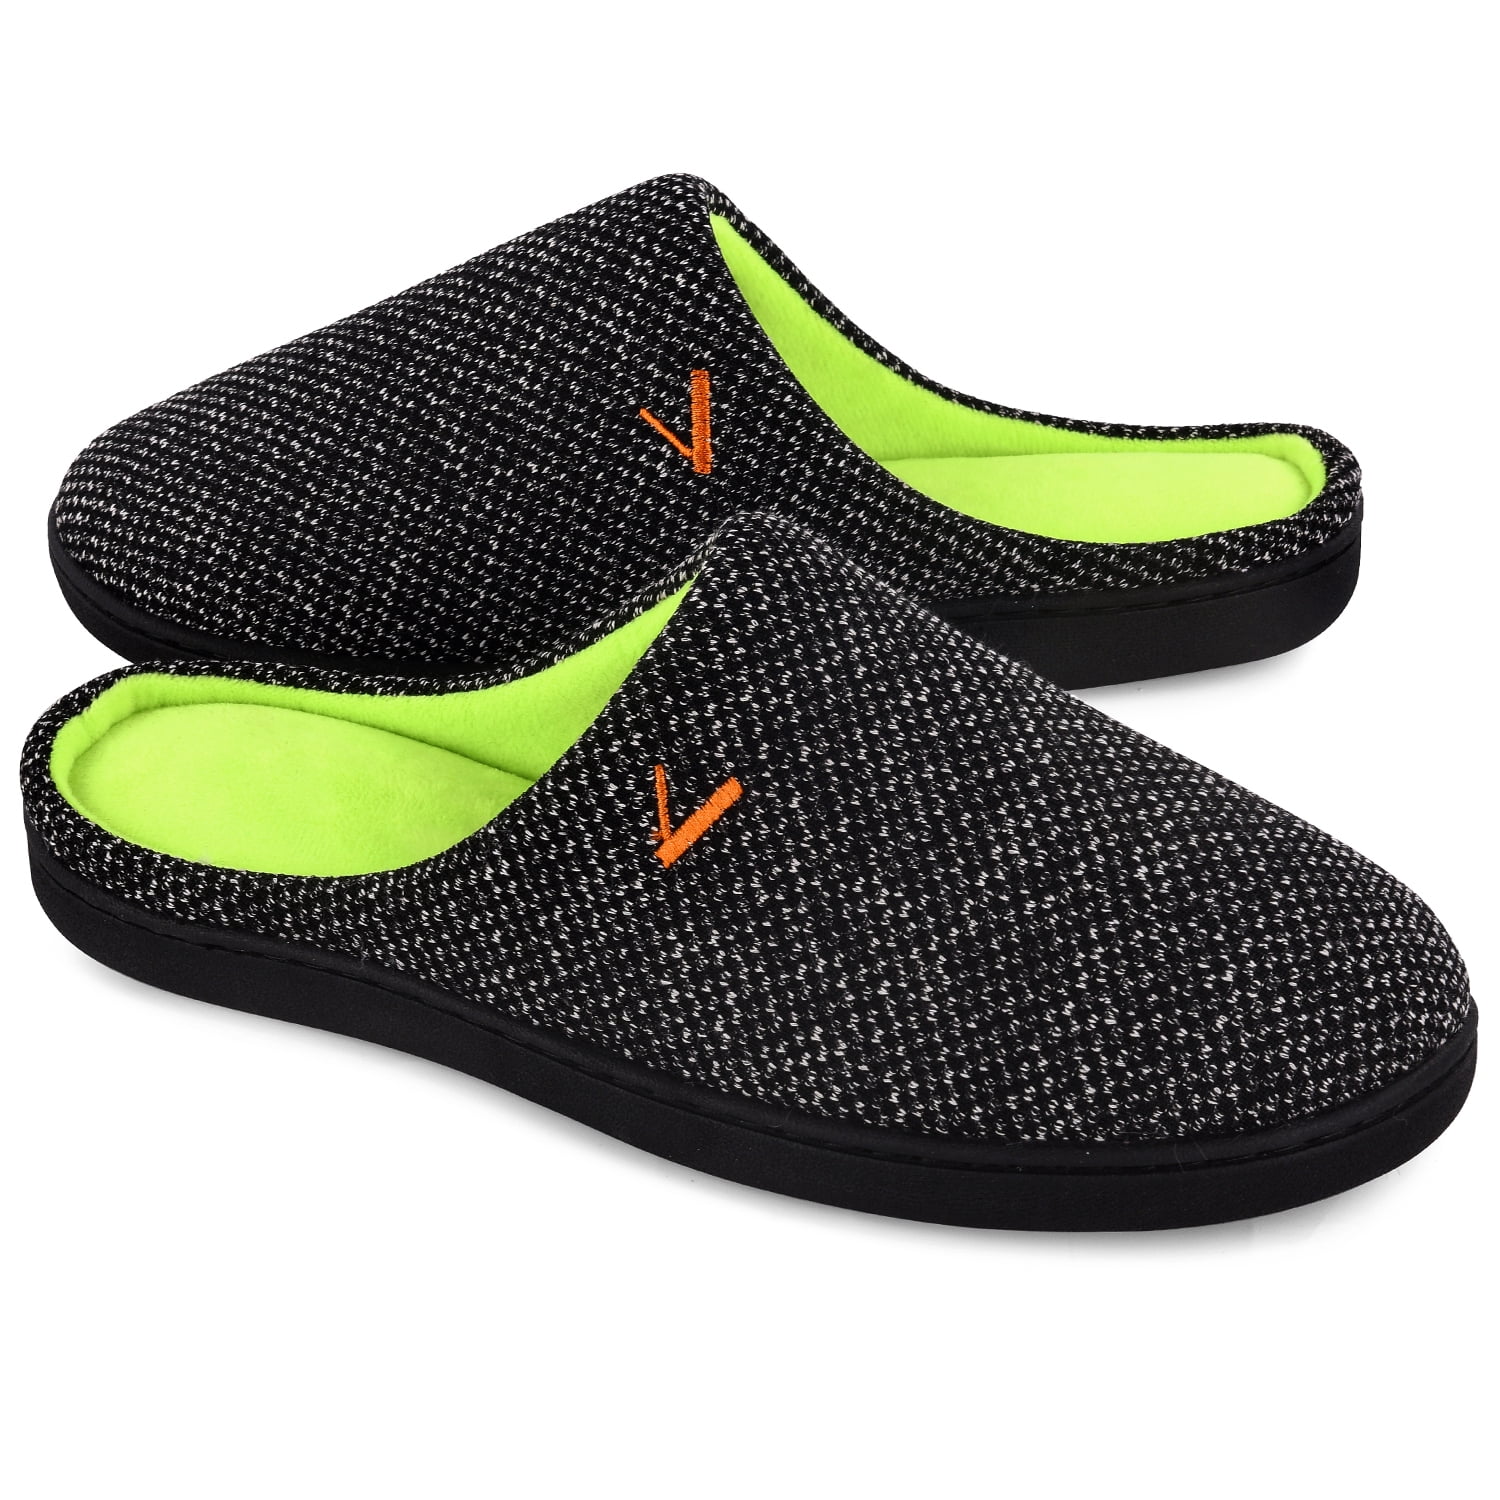 Vonmay - VONMAY Men's Slippers Two-Tone Cozy House Shoes Open Back ...